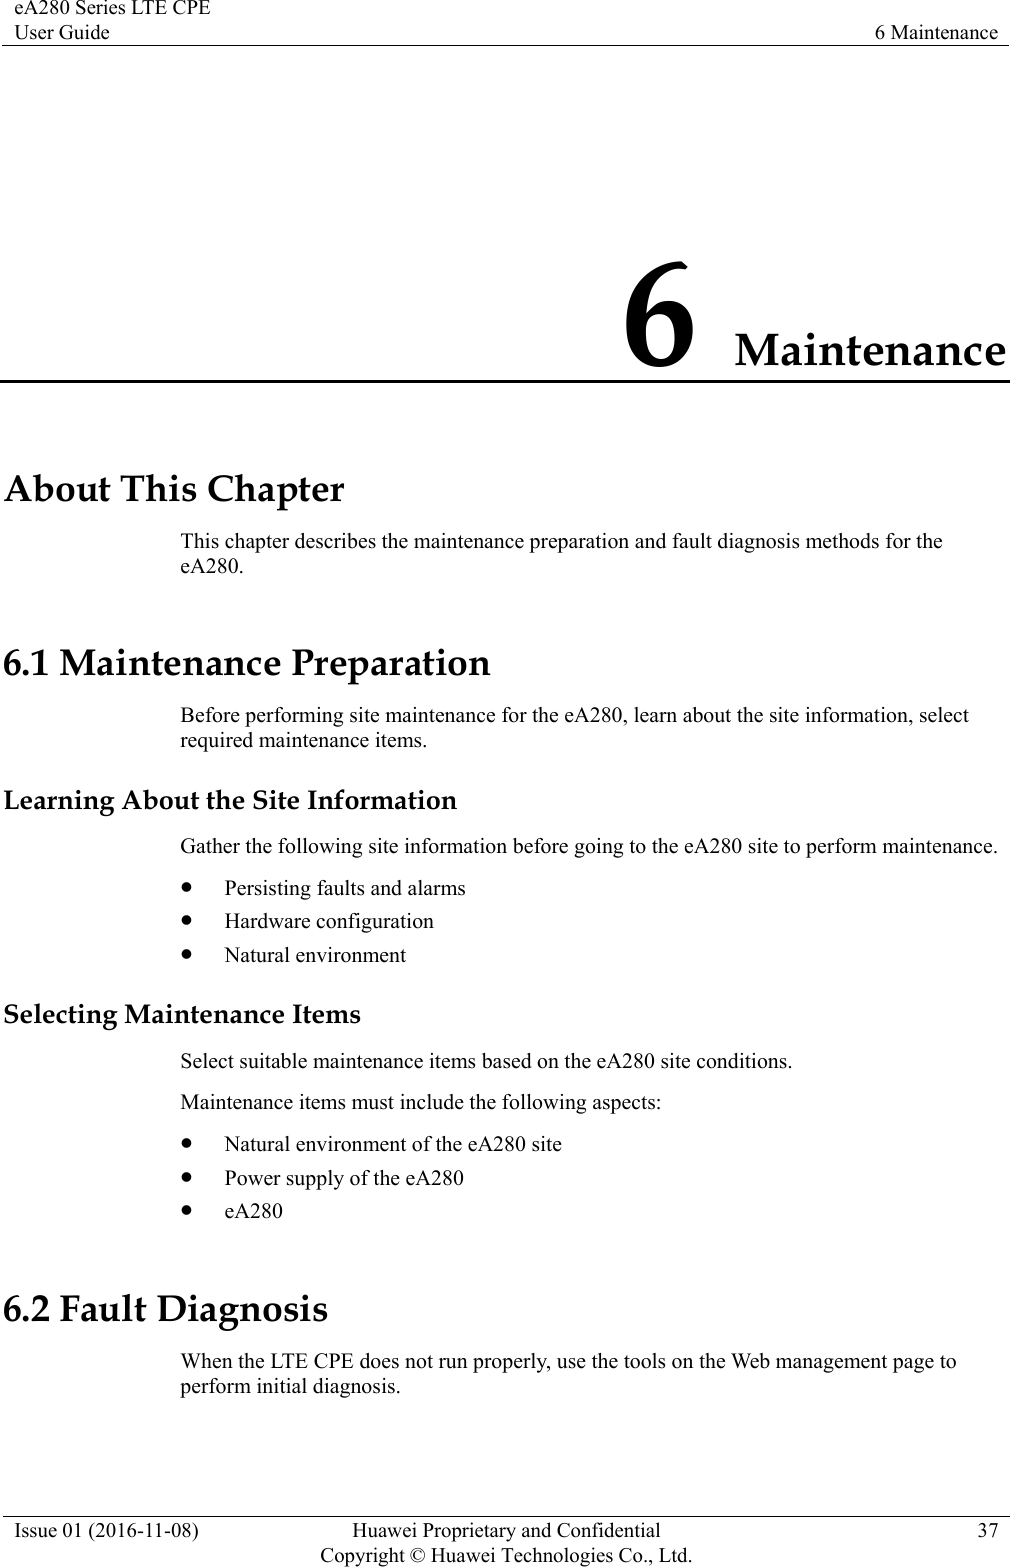 eA280 Series LTE CPE User Guide  6 Maintenance Issue 01 (2016-11-08)  Huawei Proprietary and Confidential         Copyright © Huawei Technologies Co., Ltd.37 6 Maintenance About This Chapter This chapter describes the maintenance preparation and fault diagnosis methods for the eA280. 6.1 Maintenance Preparation Before performing site maintenance for the eA280, learn about the site information, select required maintenance items. Learning About the Site Information Gather the following site information before going to the eA280 site to perform maintenance.    Persisting faults and alarms  Hardware configuration  Natural environment Selecting Maintenance Items Select suitable maintenance items based on the eA280 site conditions.   Maintenance items must include the following aspects:  Natural environment of the eA280 site  Power supply of the eA280  eA280 6.2 Fault Diagnosis When the LTE CPE does not run properly, use the tools on the Web management page to perform initial diagnosis. 